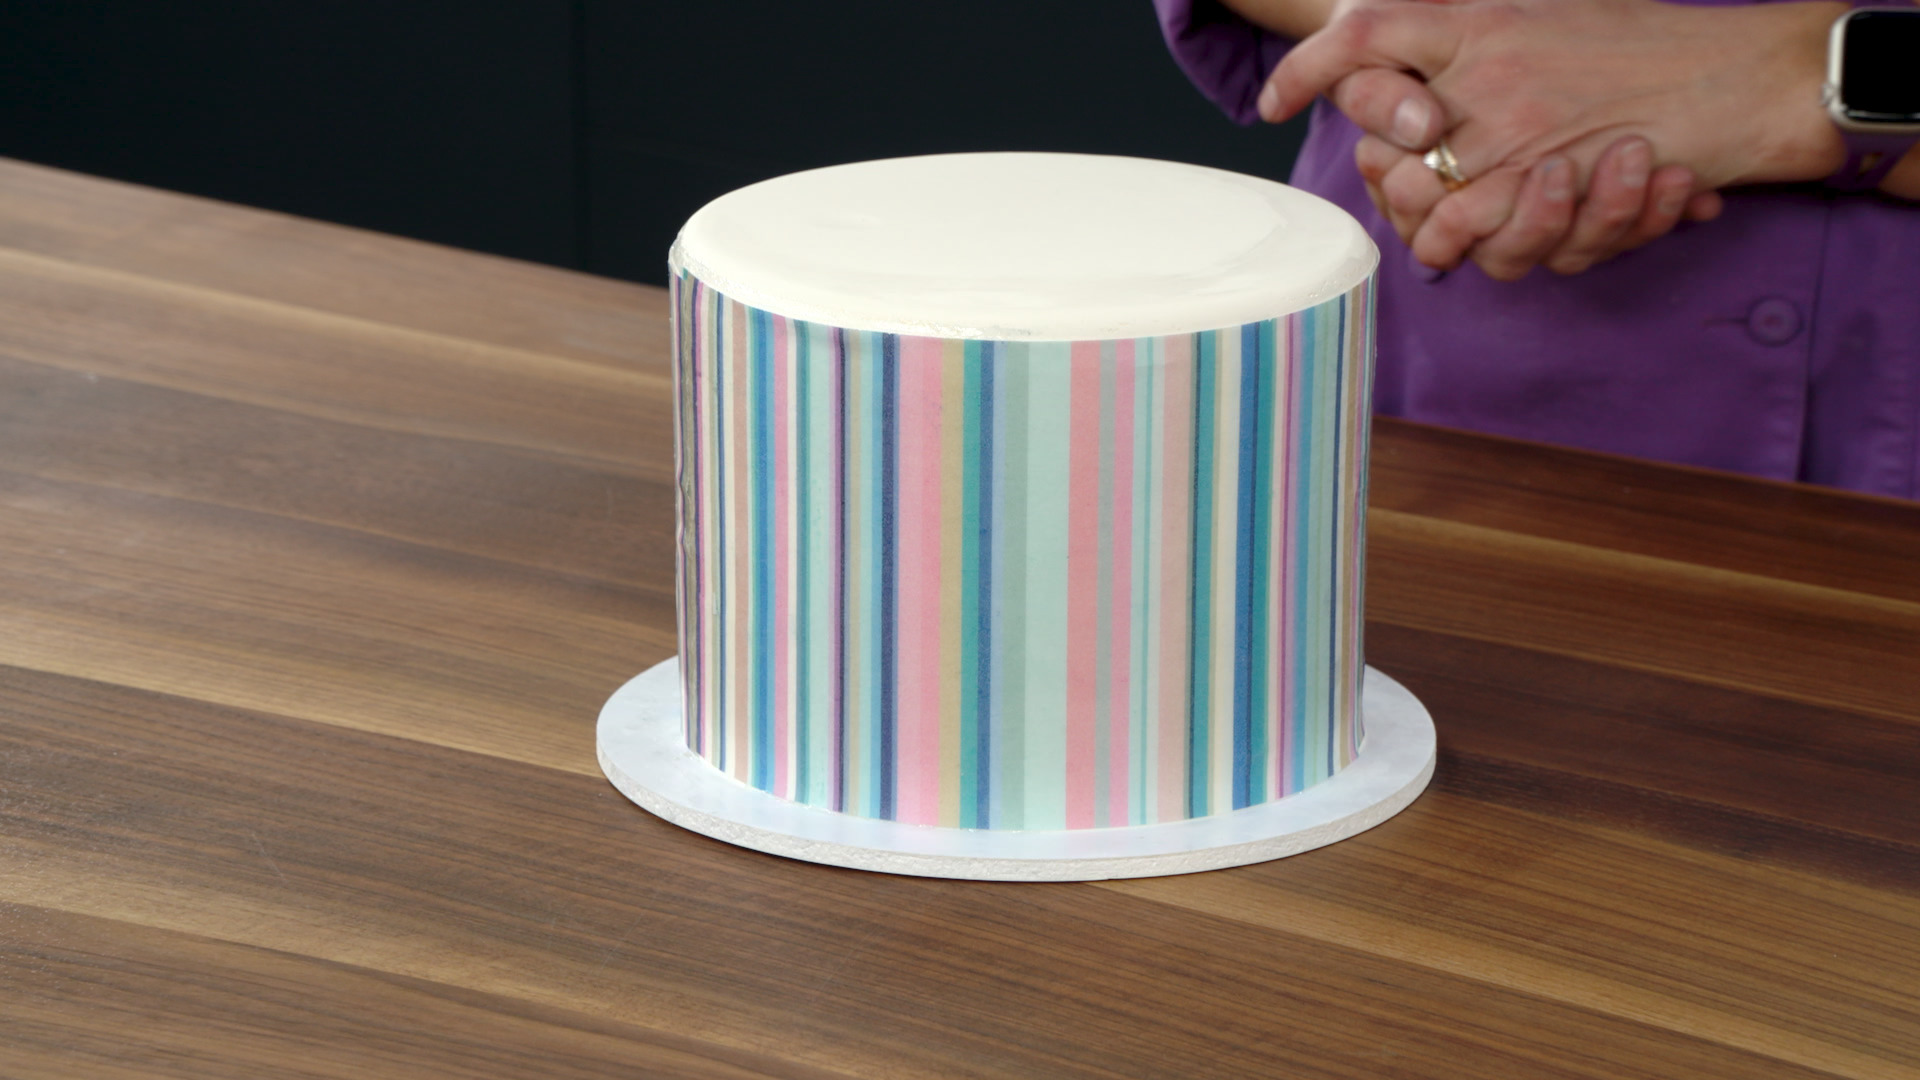 3 Different Ways To Decorate A Cake With WAFER PAPER, Stenciled Wafer  Paper